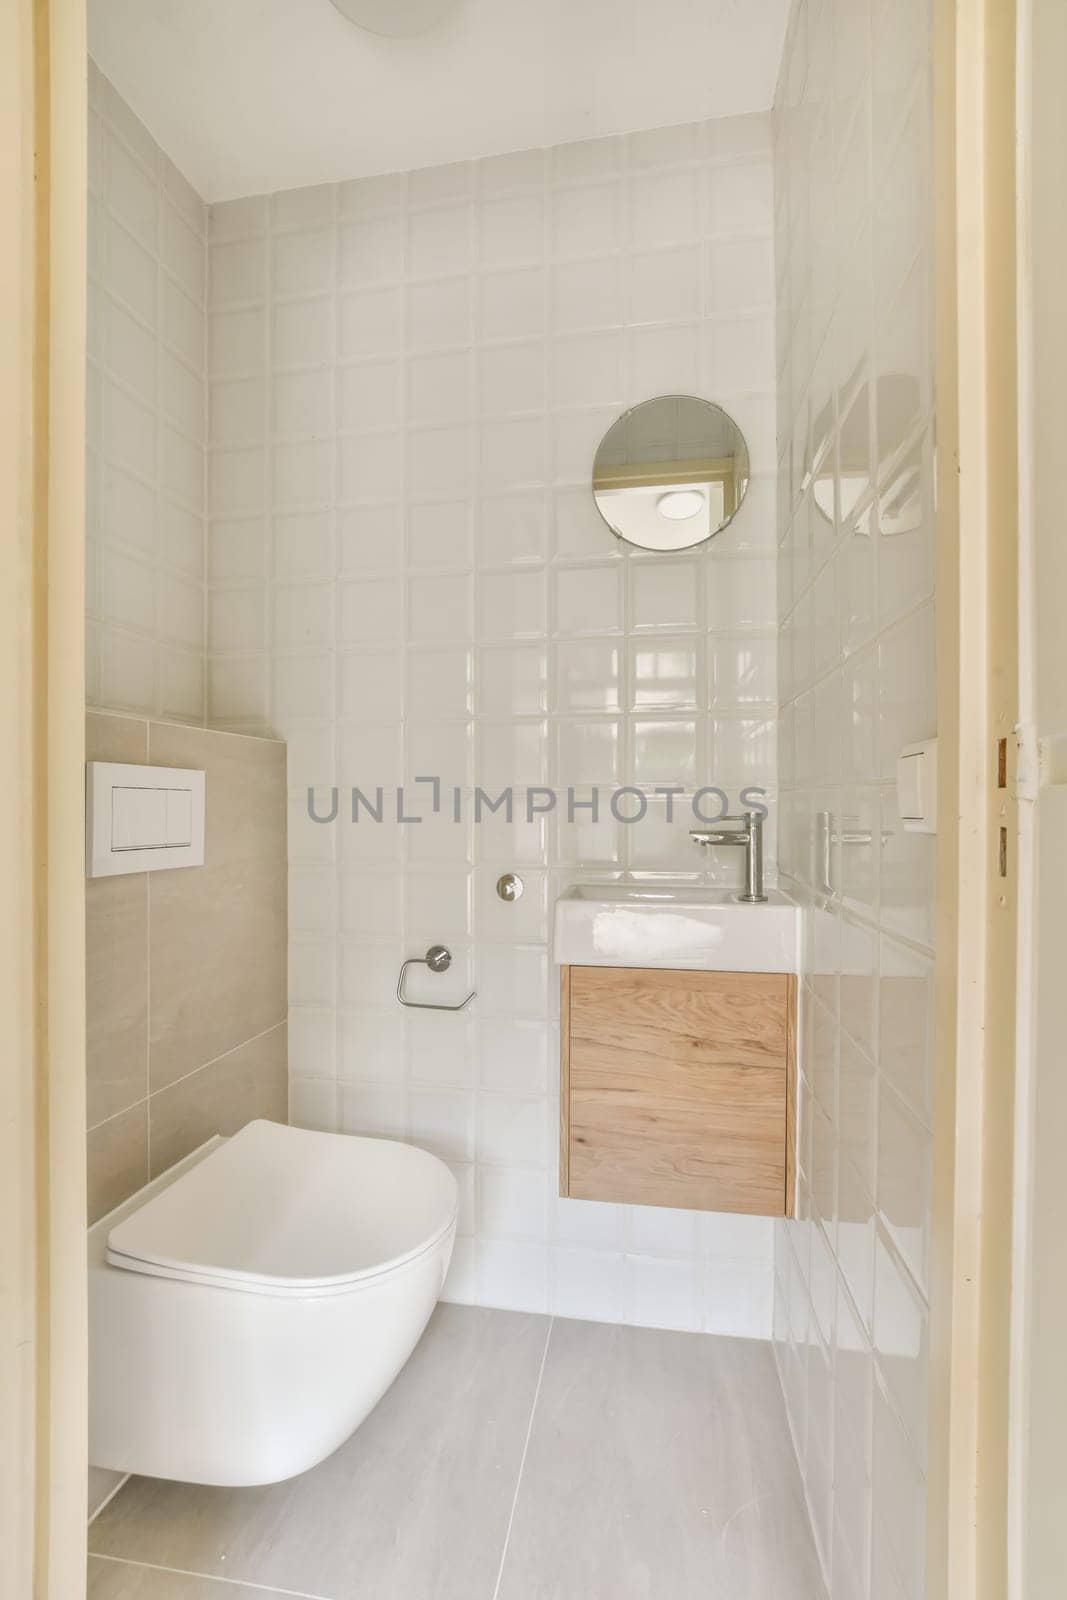 a small bathroom with white tiles and wood cabinet in the corner, as seen from the doorway leading to the toilet